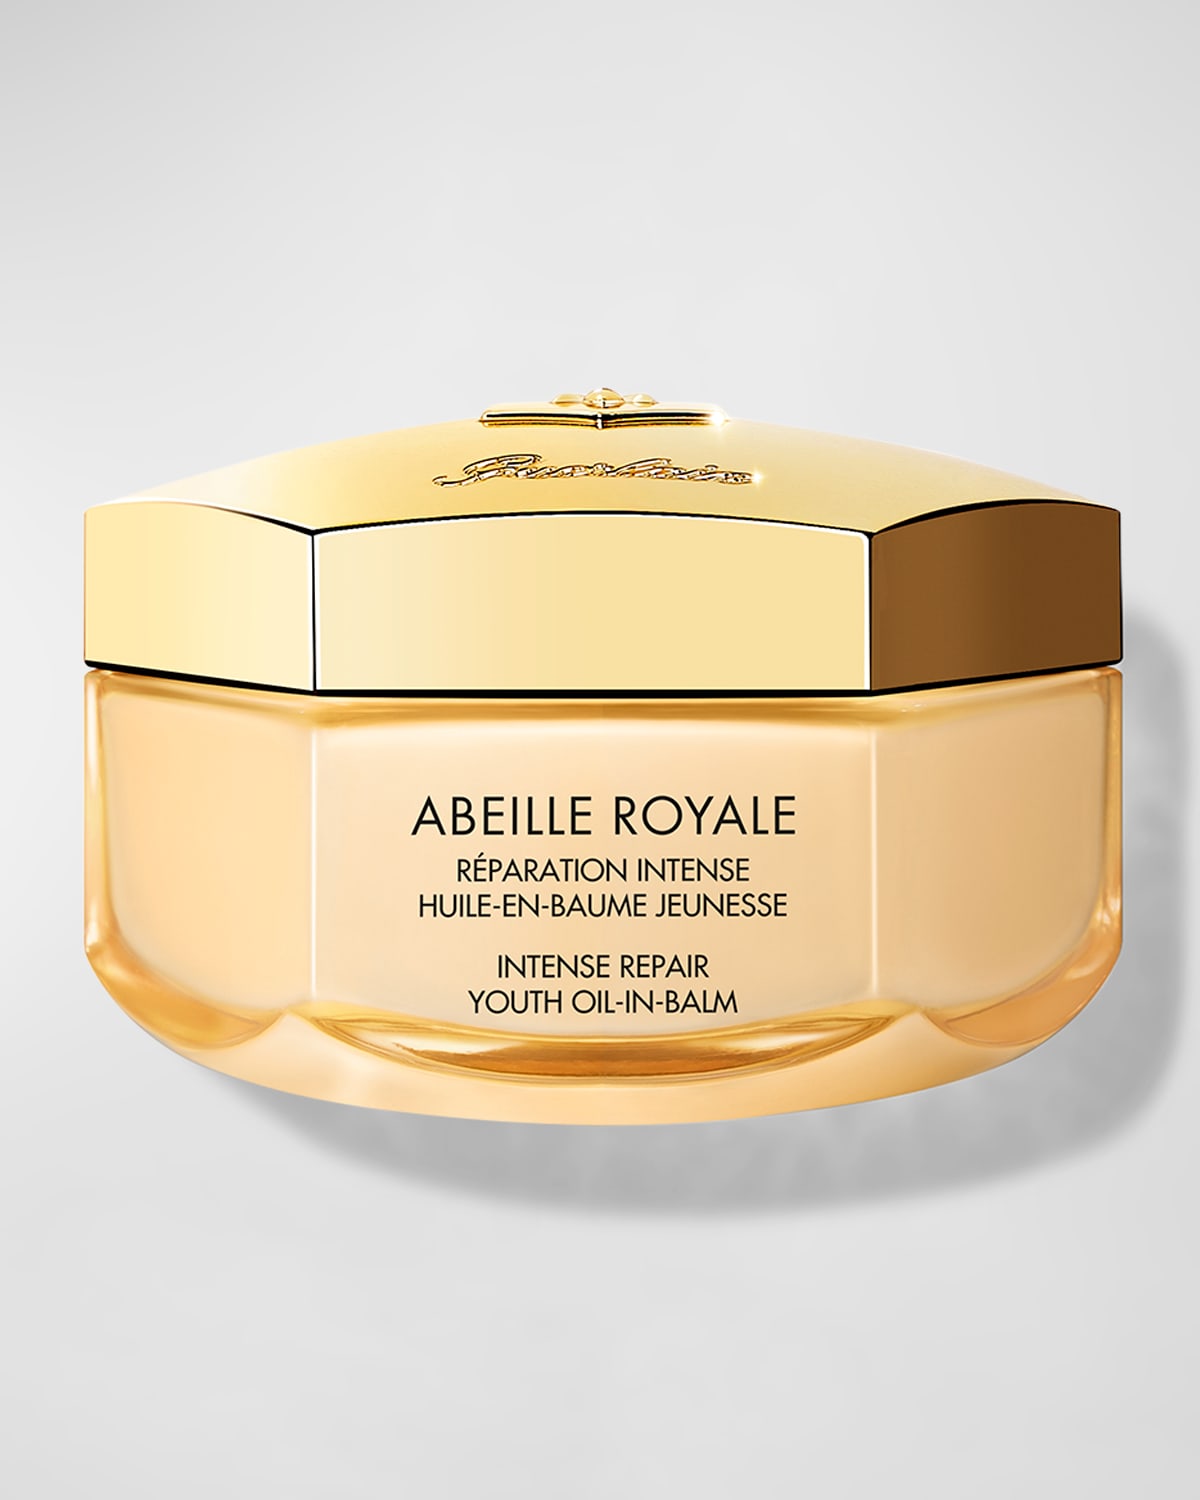 Abeille Royale Intense Repair Youth Oil in Balm, 2.7 oz.